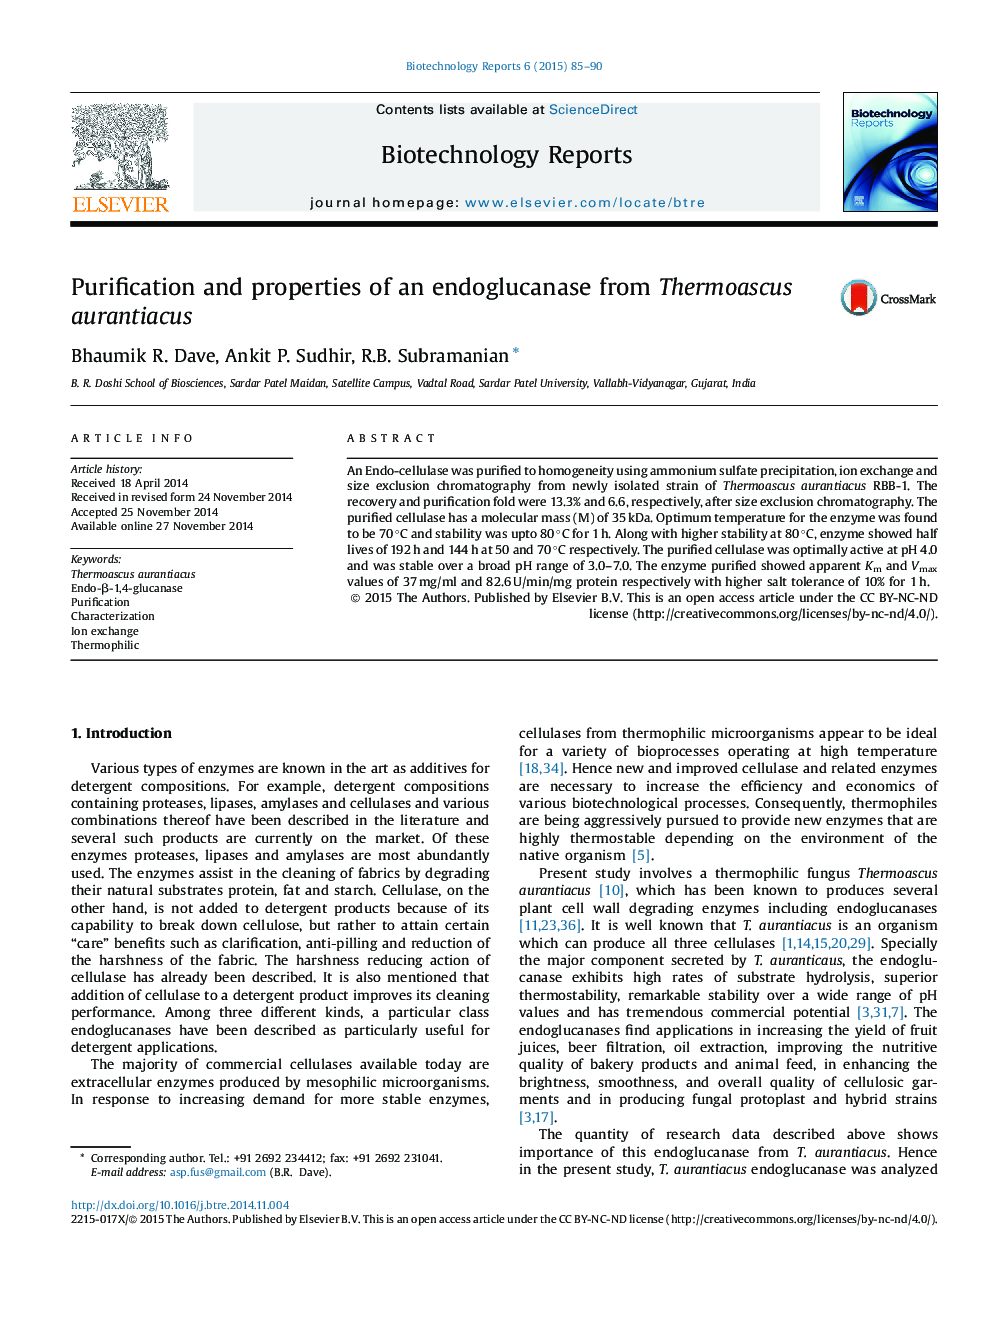 Purification and properties of an endoglucanase from Thermoascus aurantiacus 